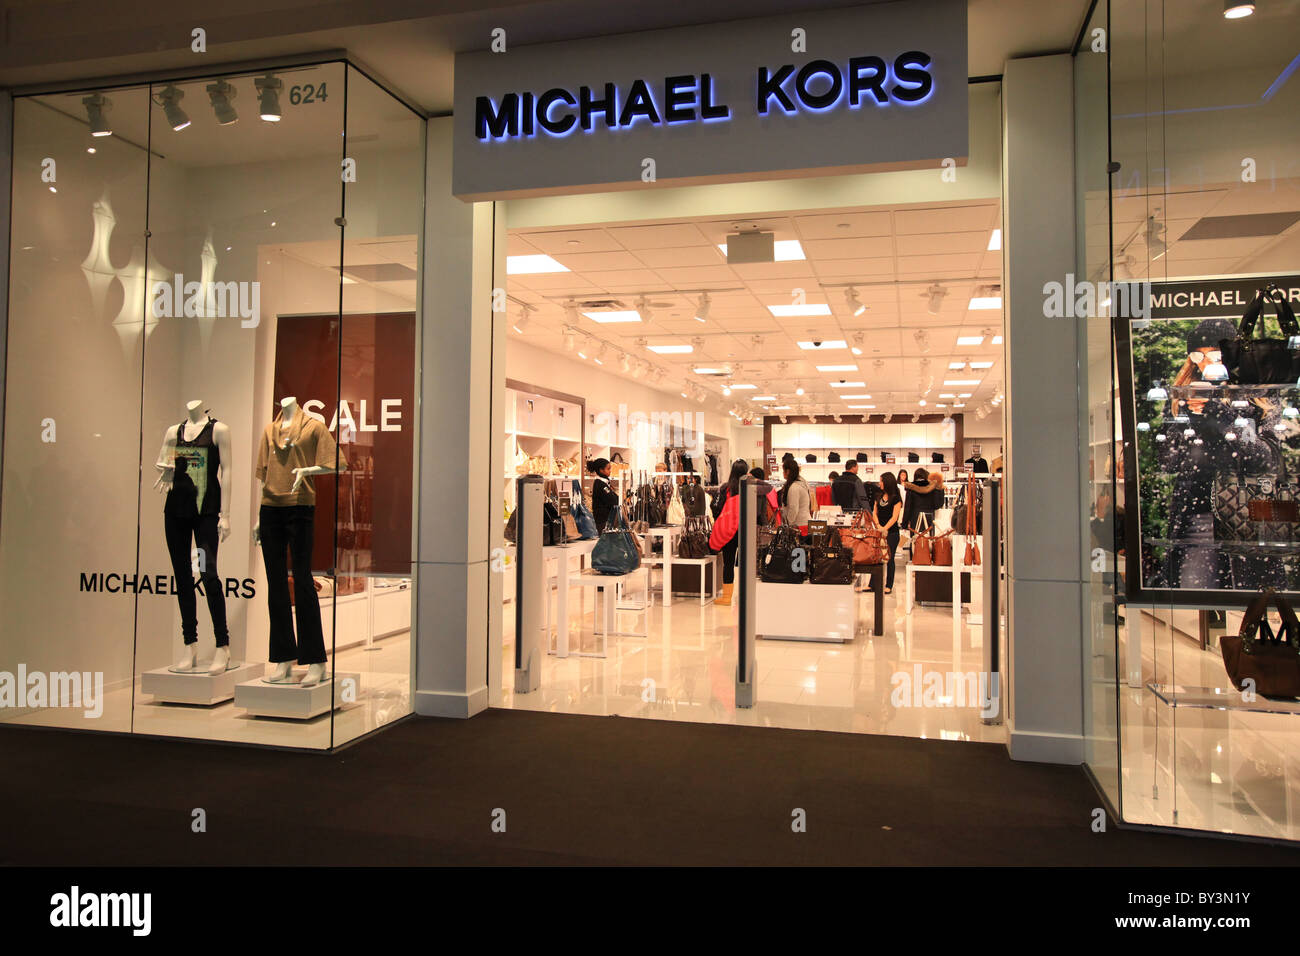 michael kors outlet store